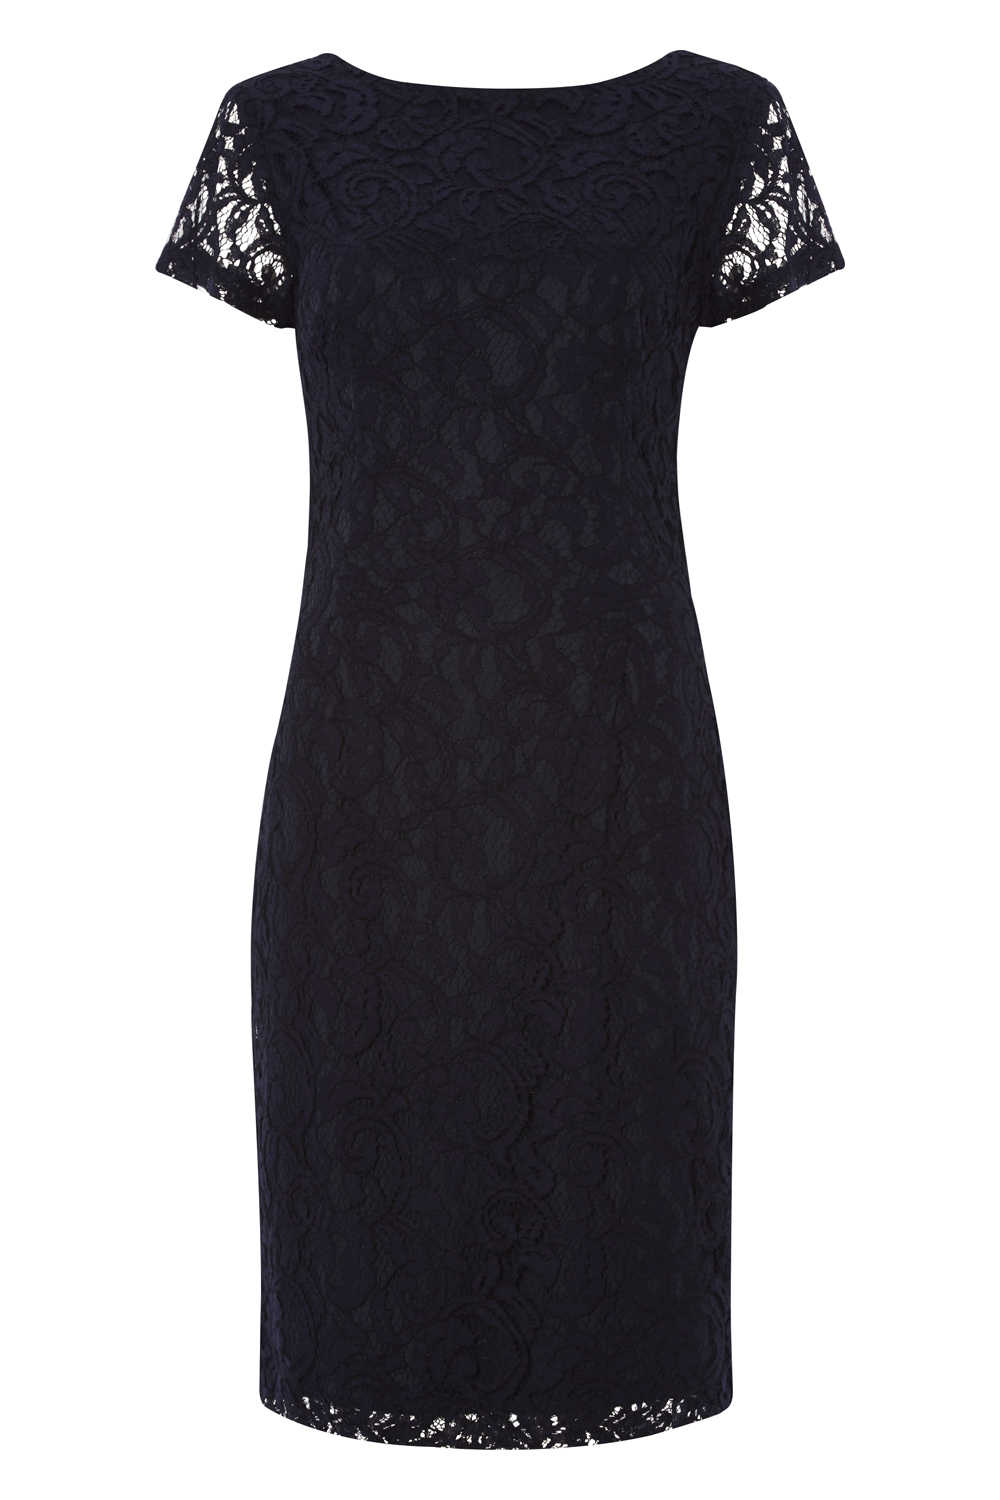 Navy  Short Sleeve Luxe Lace Dress, Image 4 of 4